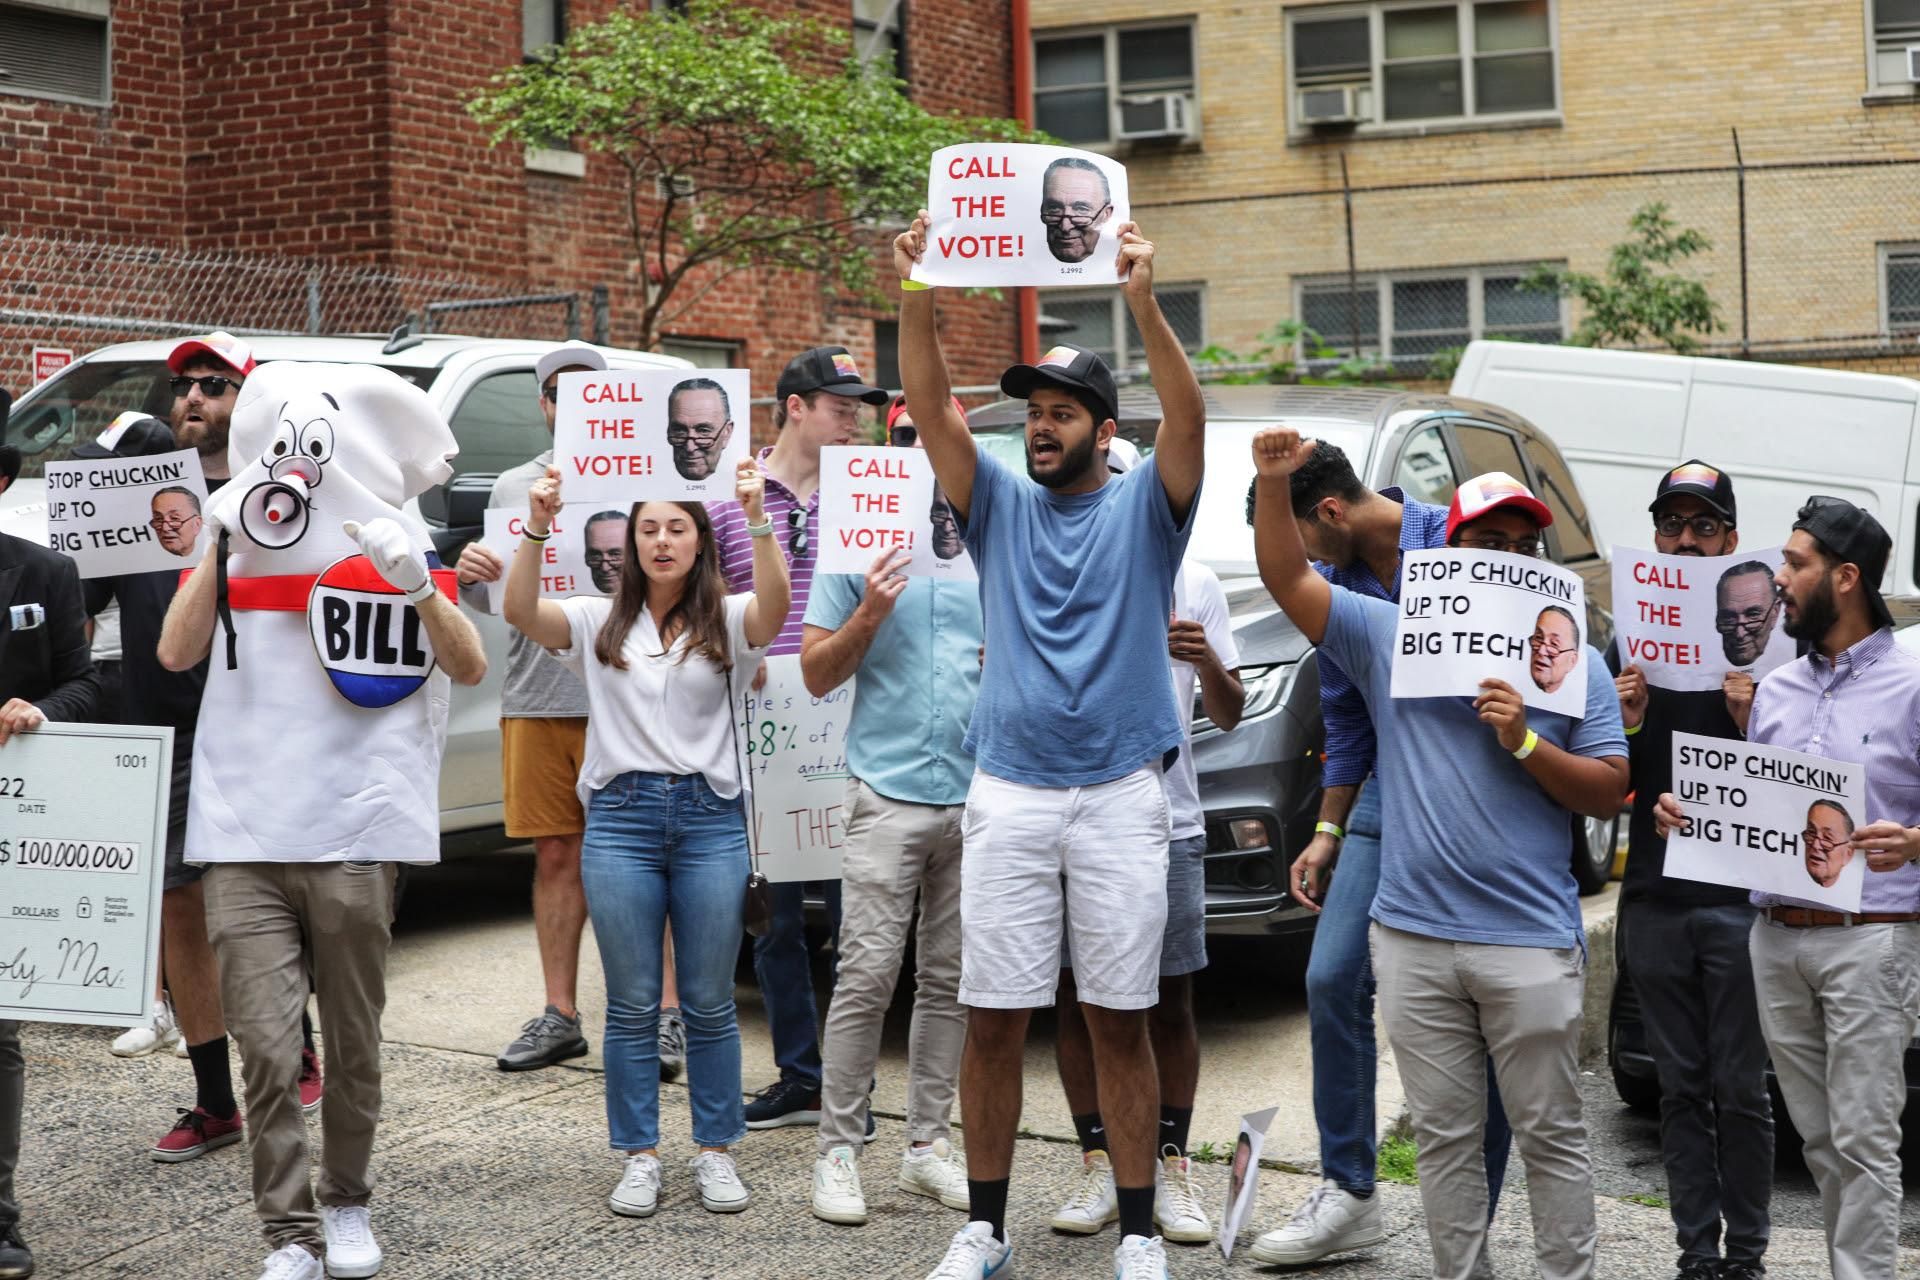 Activists demonstrate in Washington, D.C. on July 26, 2022 to urge Senate Majority Leader Chuck Schumer (D-N.Y.) to hold a vote on antitrust legislation.